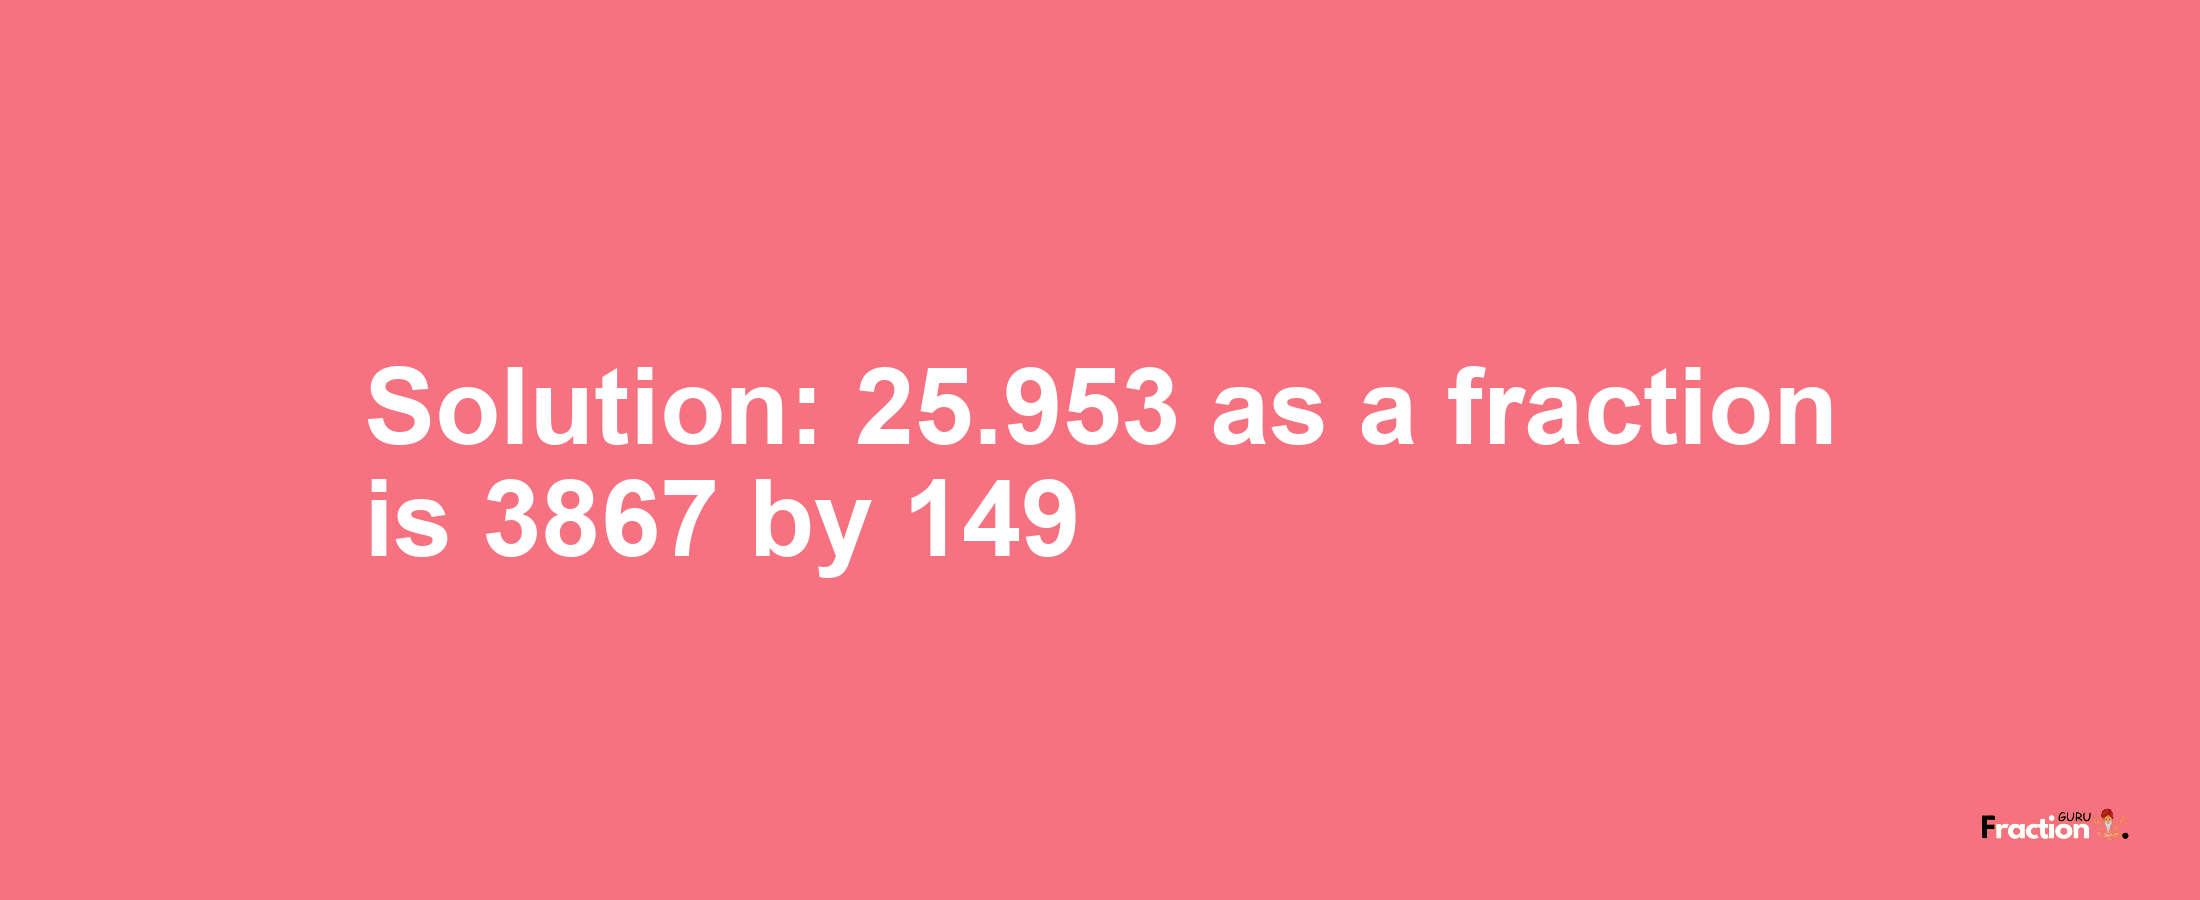 Solution:25.953 as a fraction is 3867/149